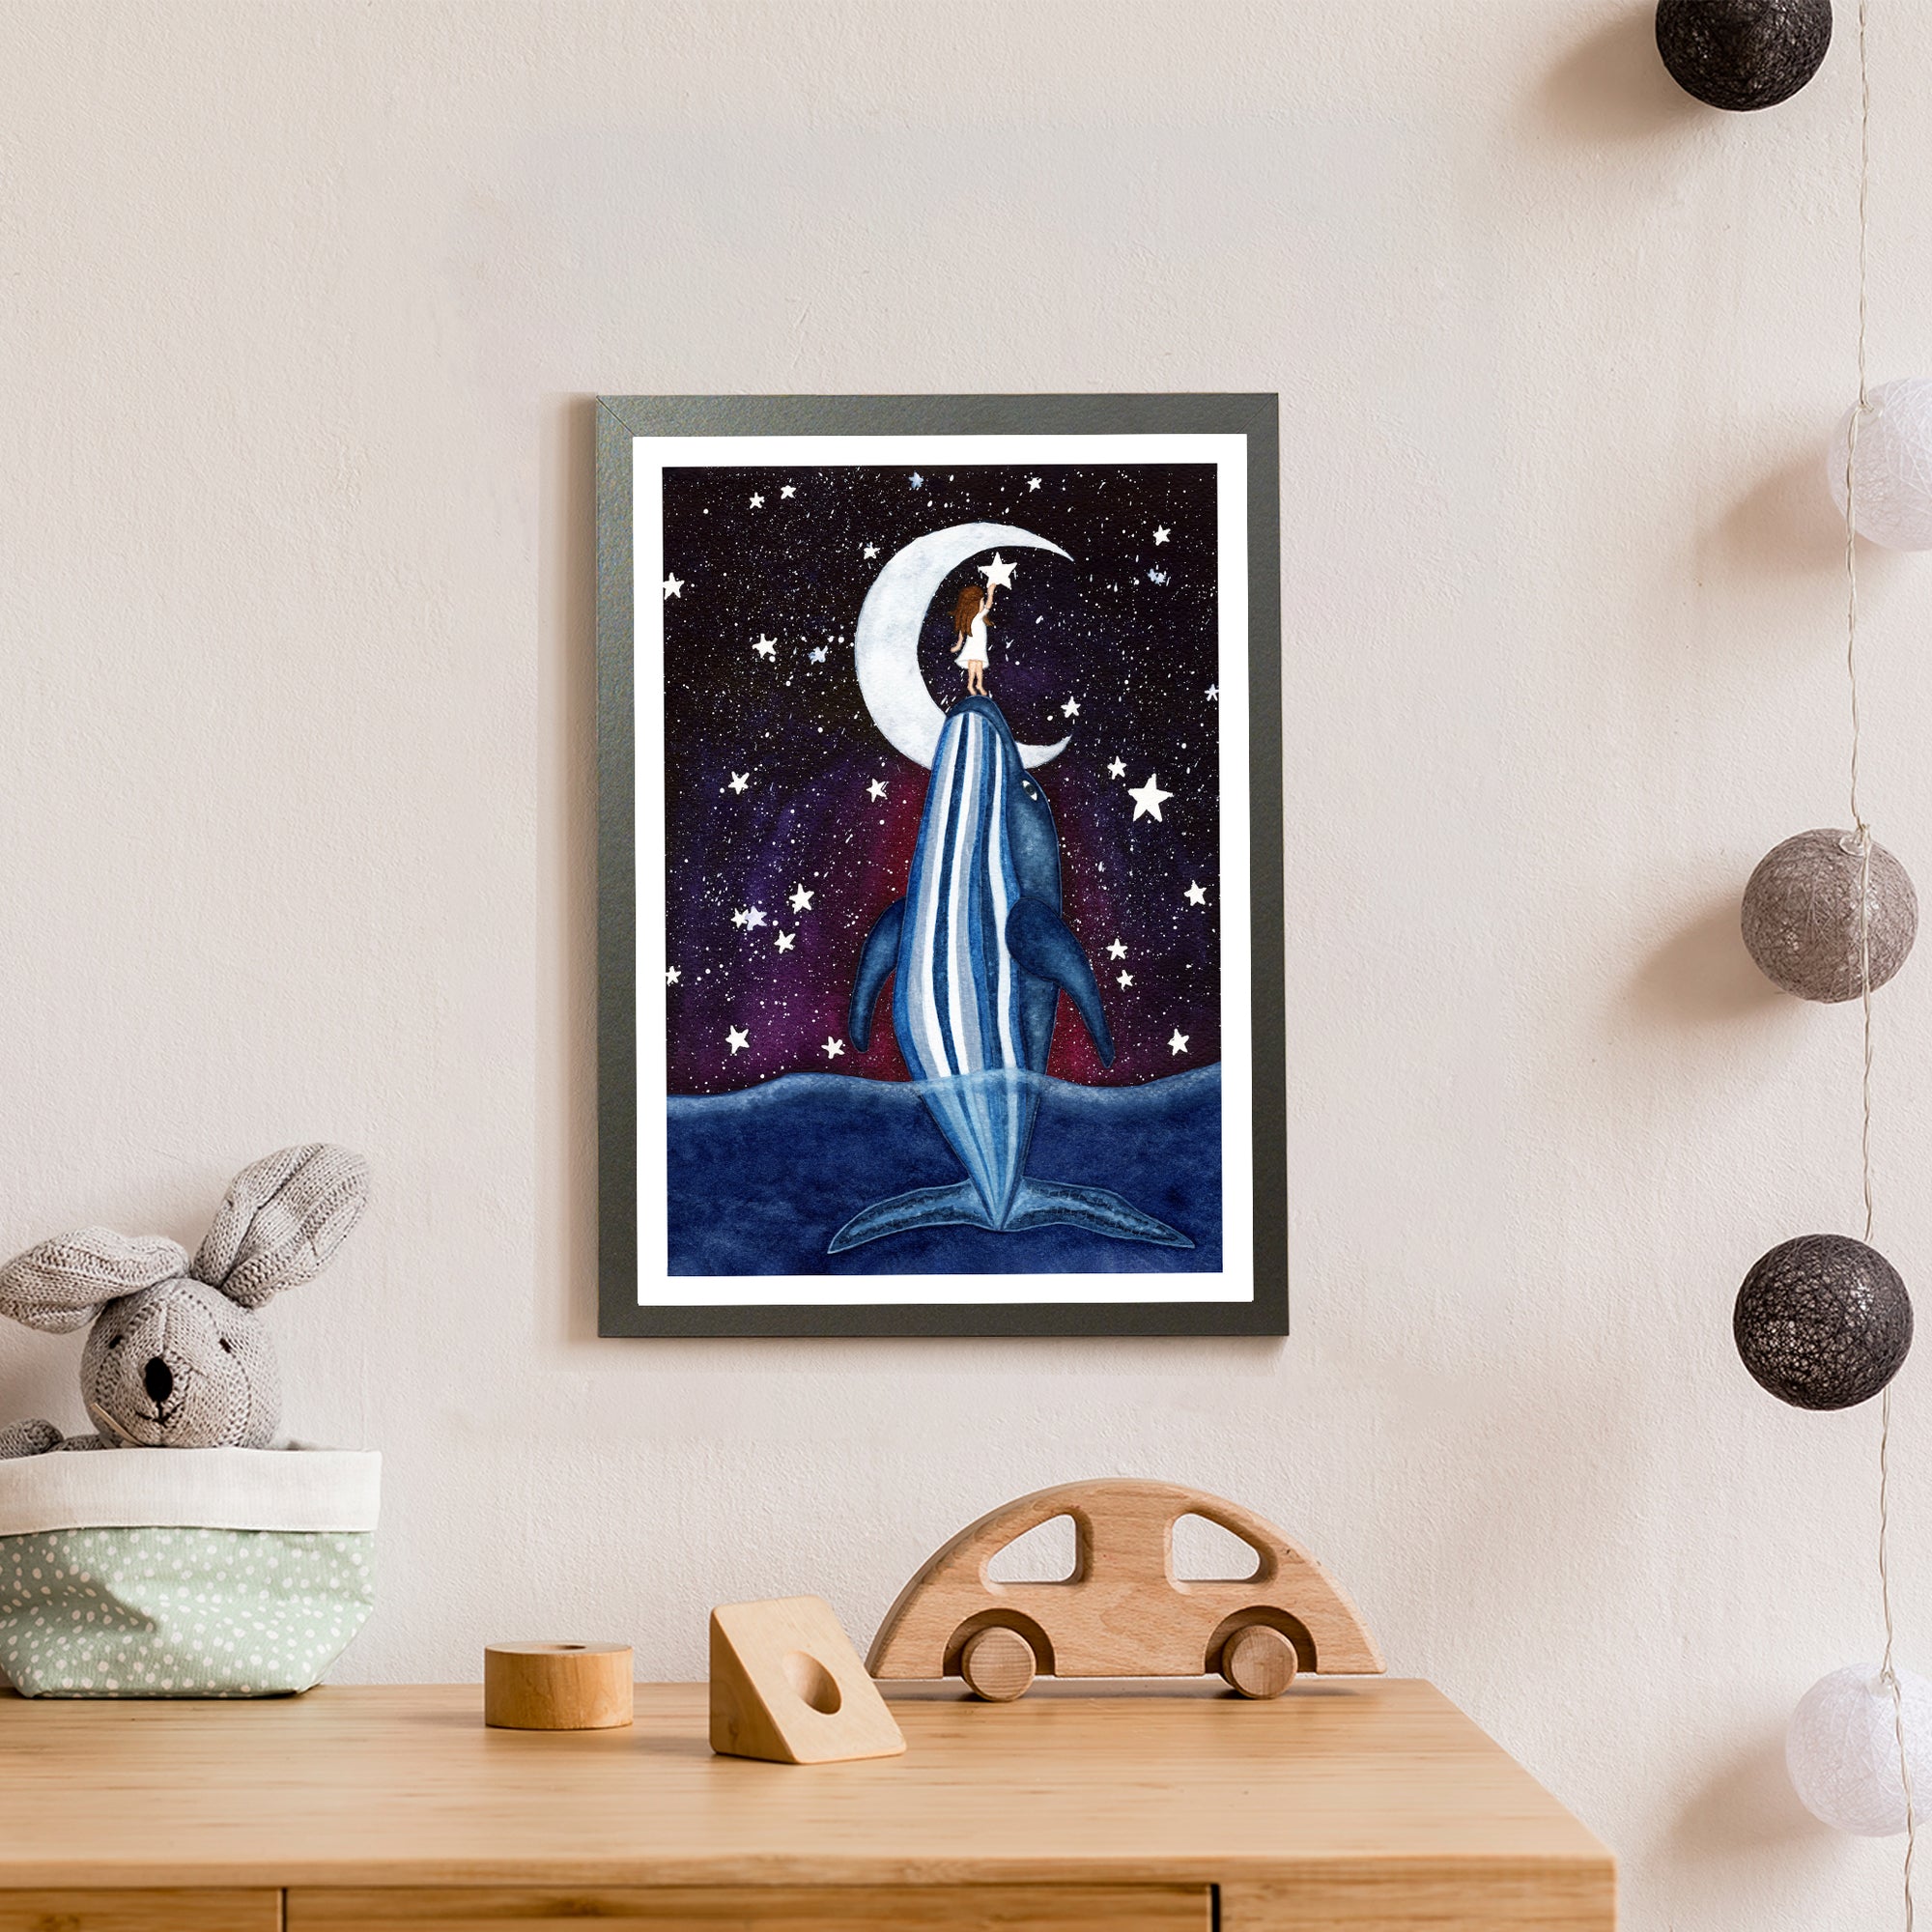 A white girl with brown hair is lifted up by a blue whale to grab a star out of a starry night sky in front of a crescent moon (print only)